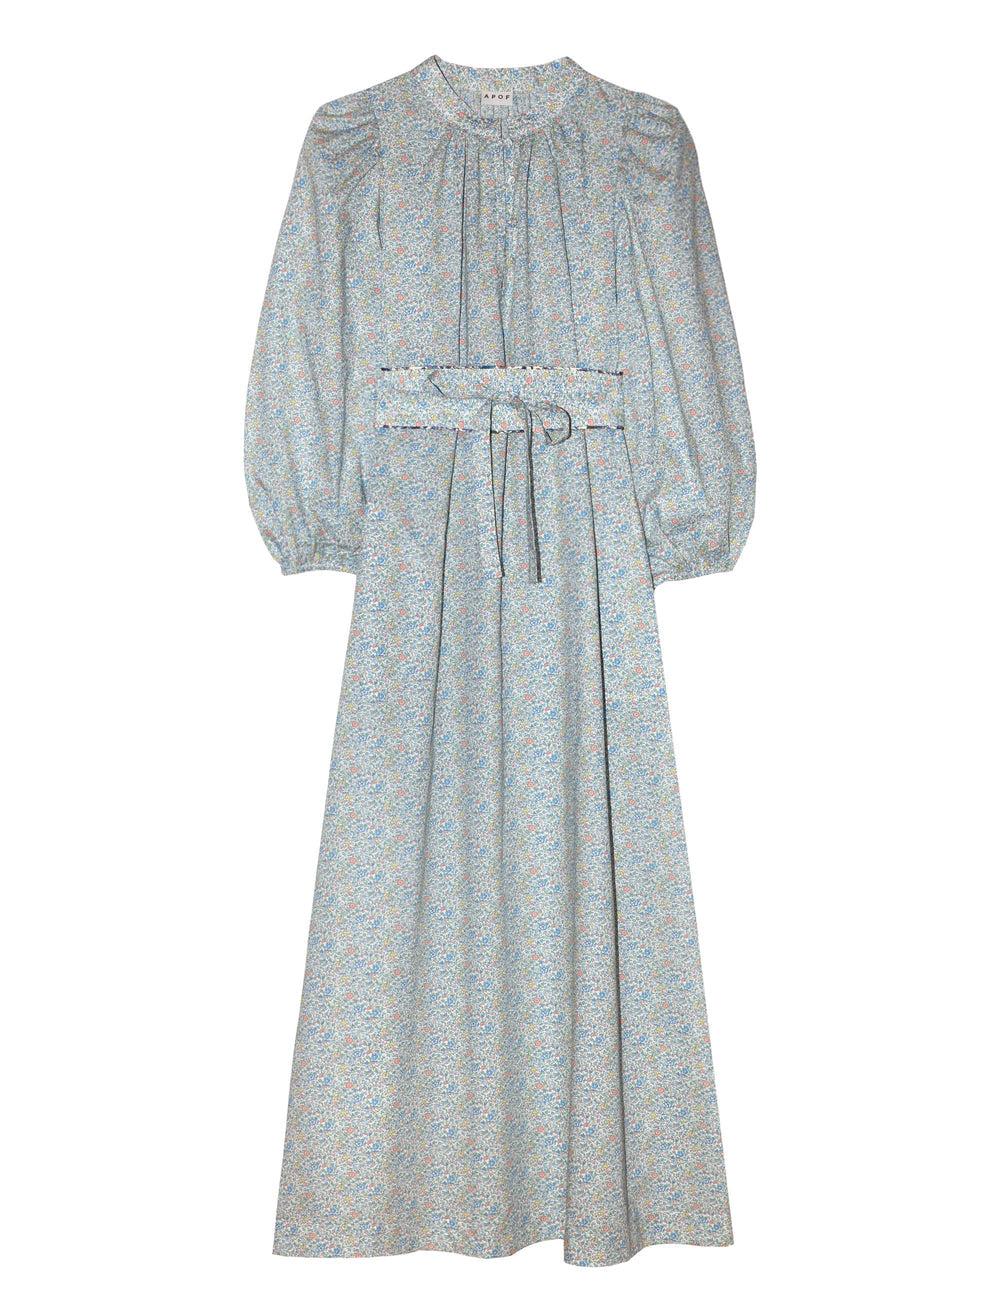 APOF Maya Dress in Liberty Kate and Milly Fabric